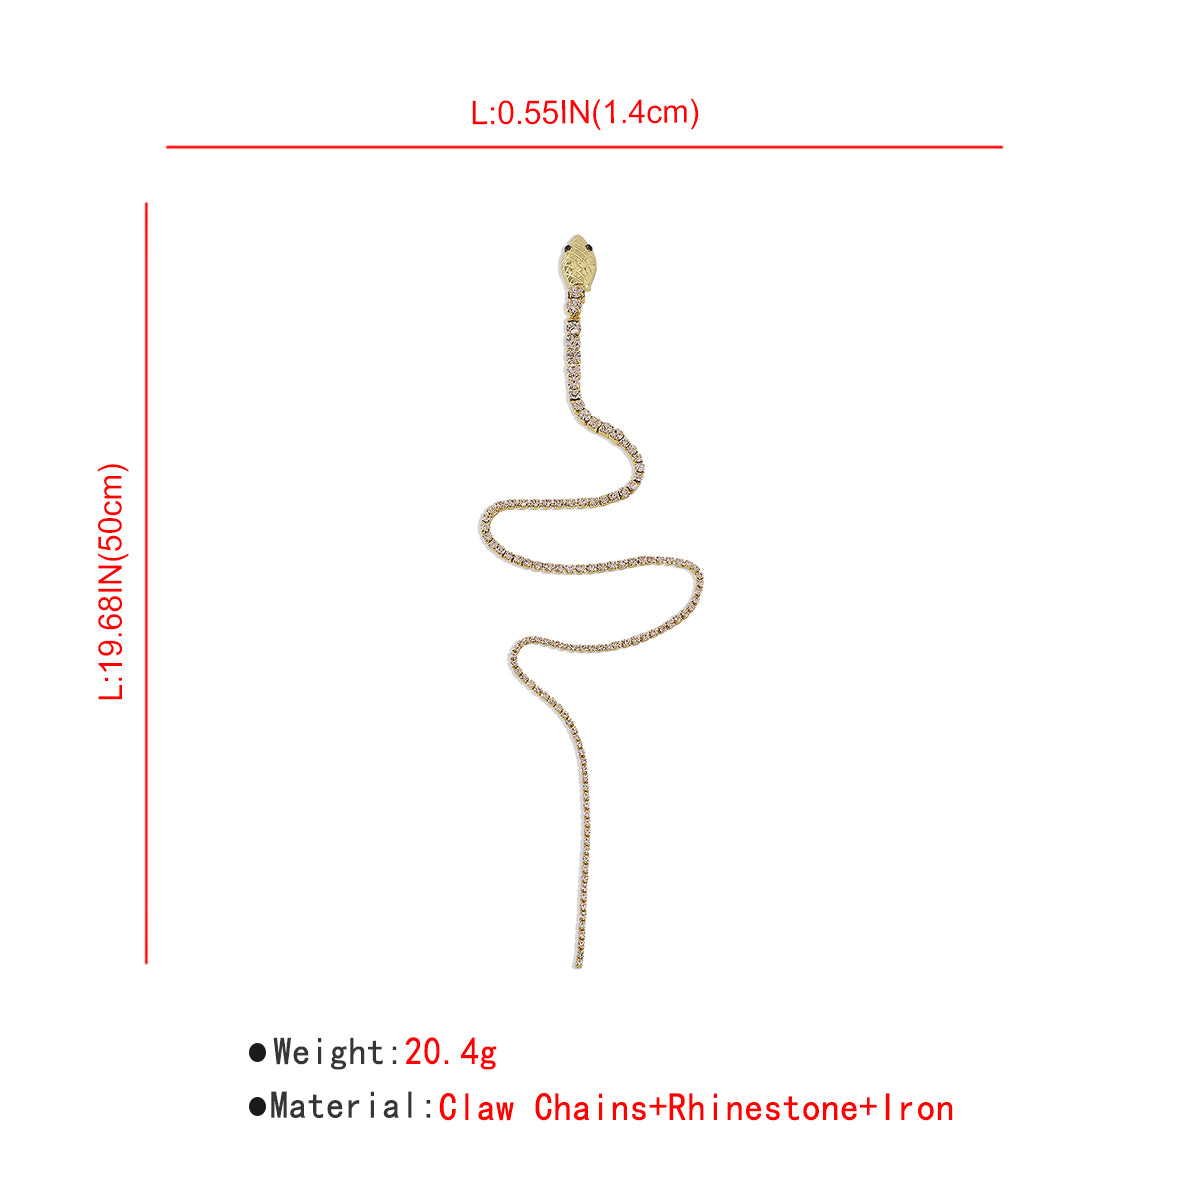 Long Claw Chain Snake Hair Clip medyjewelry